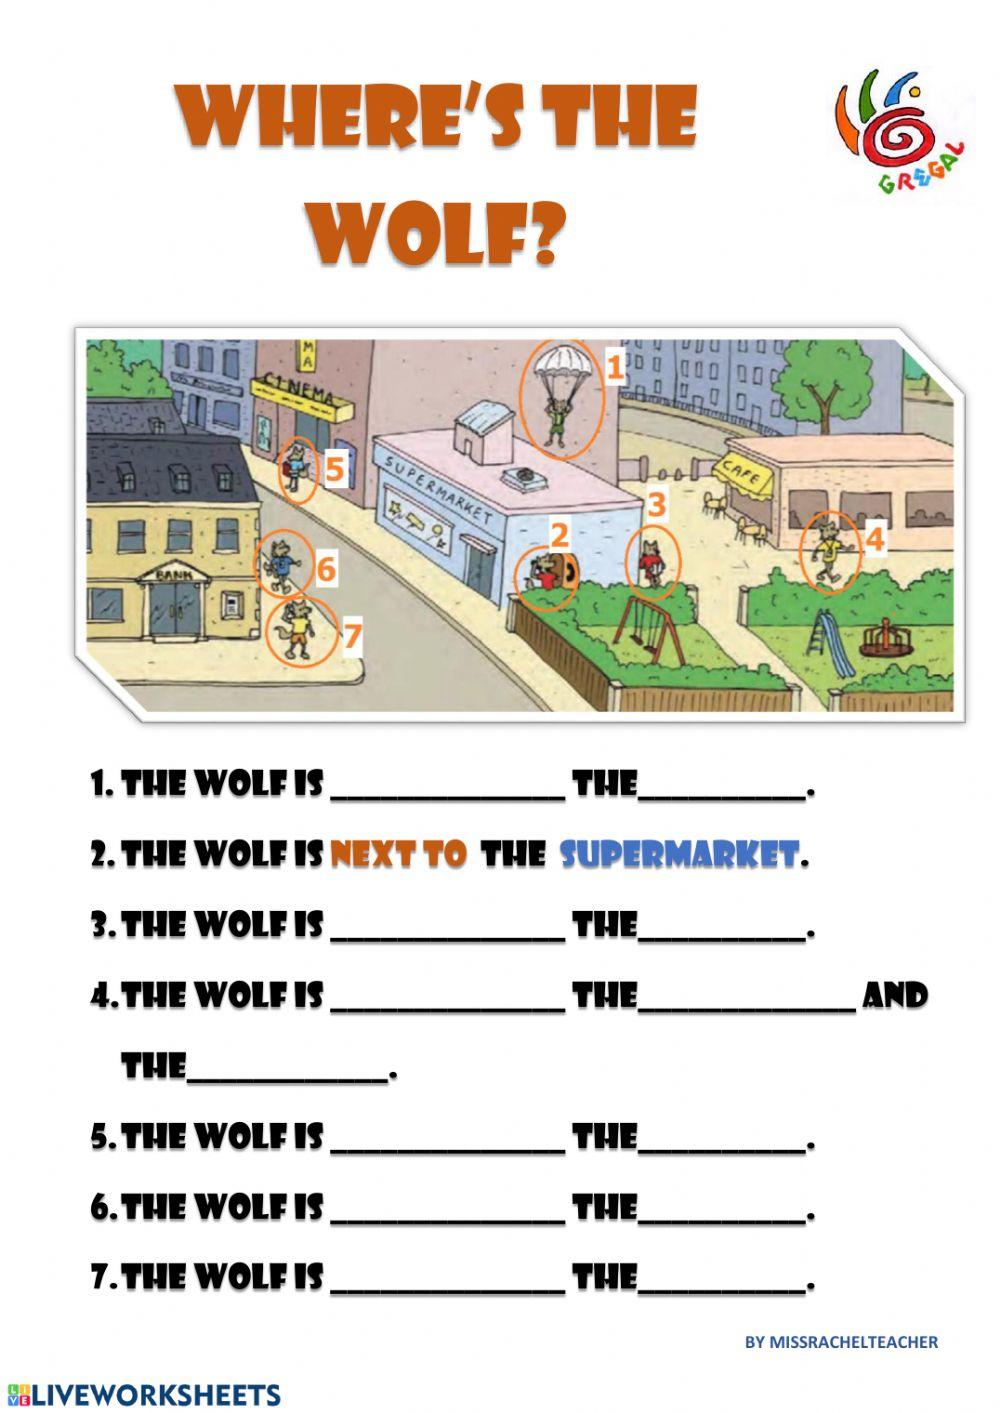 Where's the wolf?